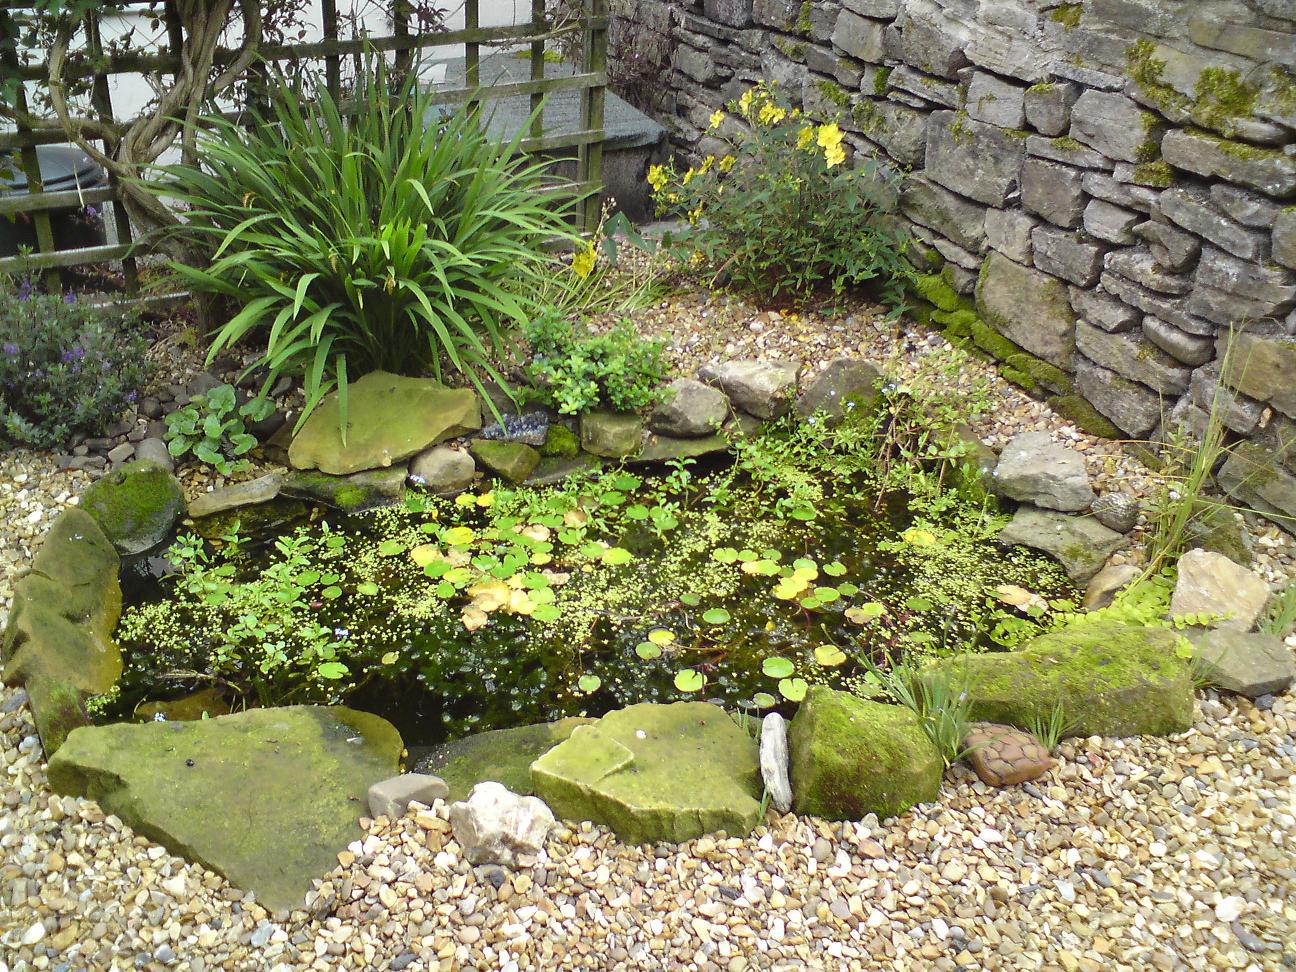 The Poorest Company: Building a wildlife pond - Part 4